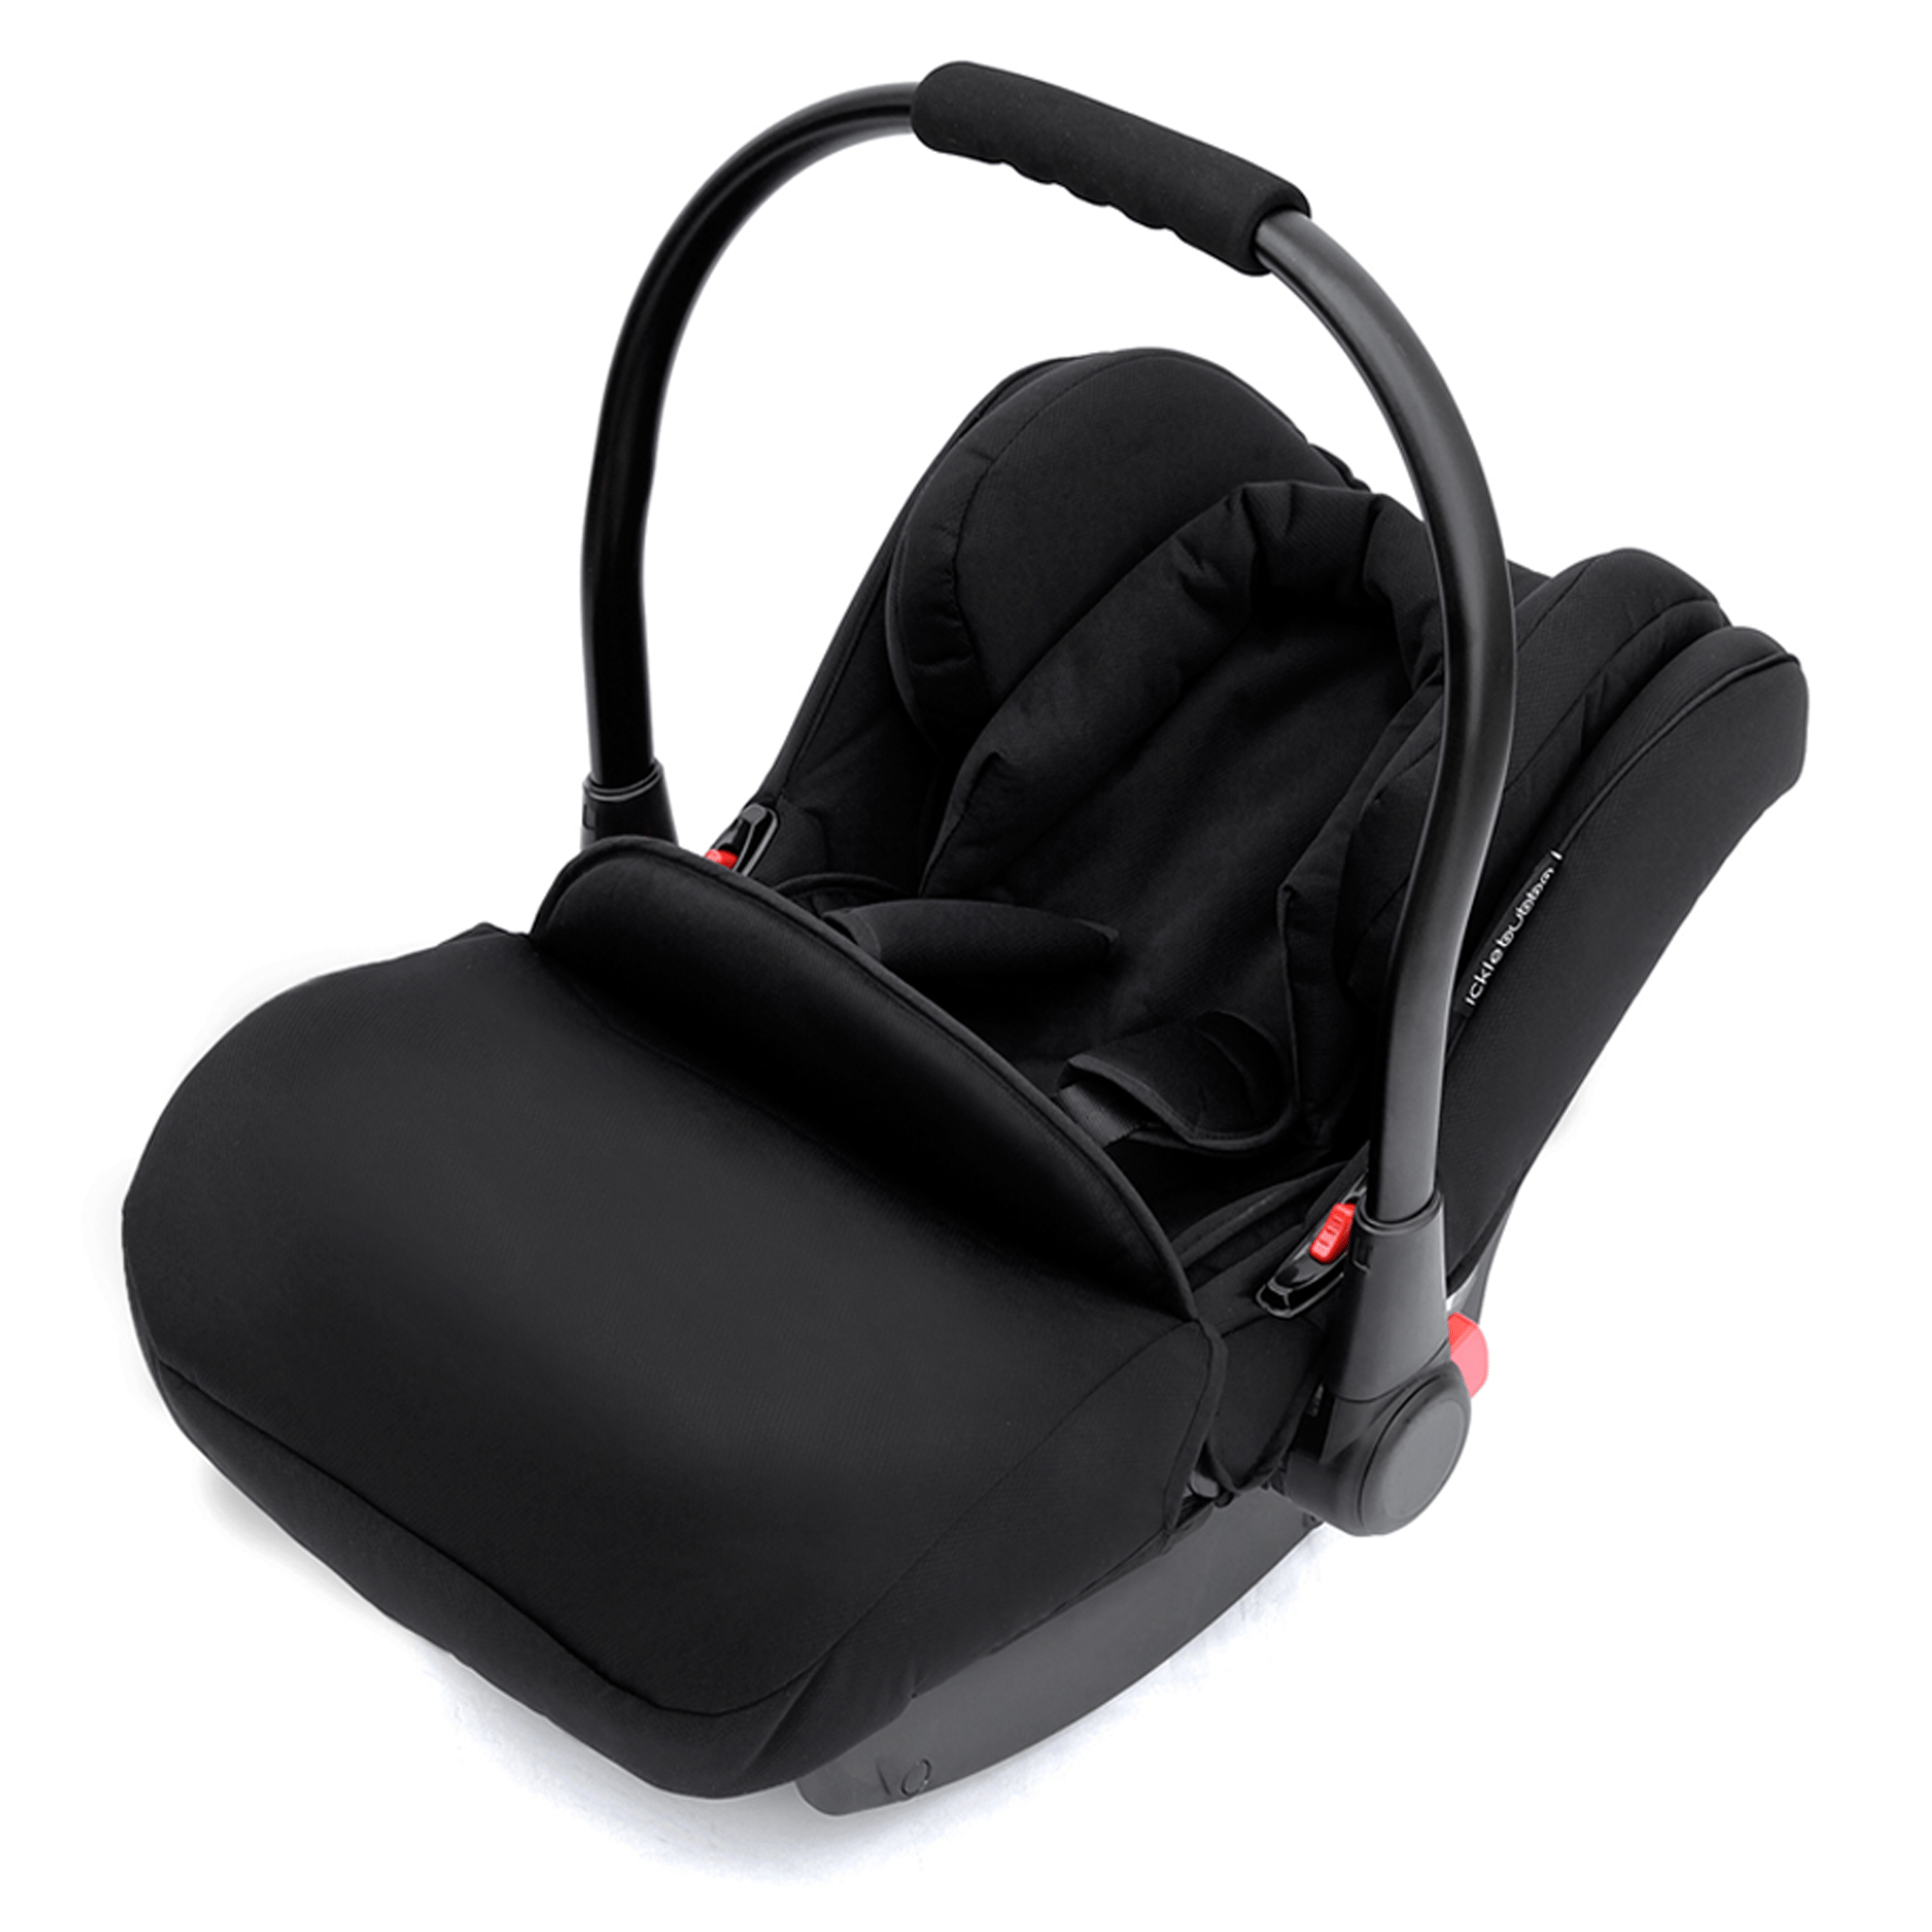 Ickle Bubba baby car seats Ickle Bubba Galaxy Group 0+ Infant Carrier With ISOFIX Base Black 20-002-100-001